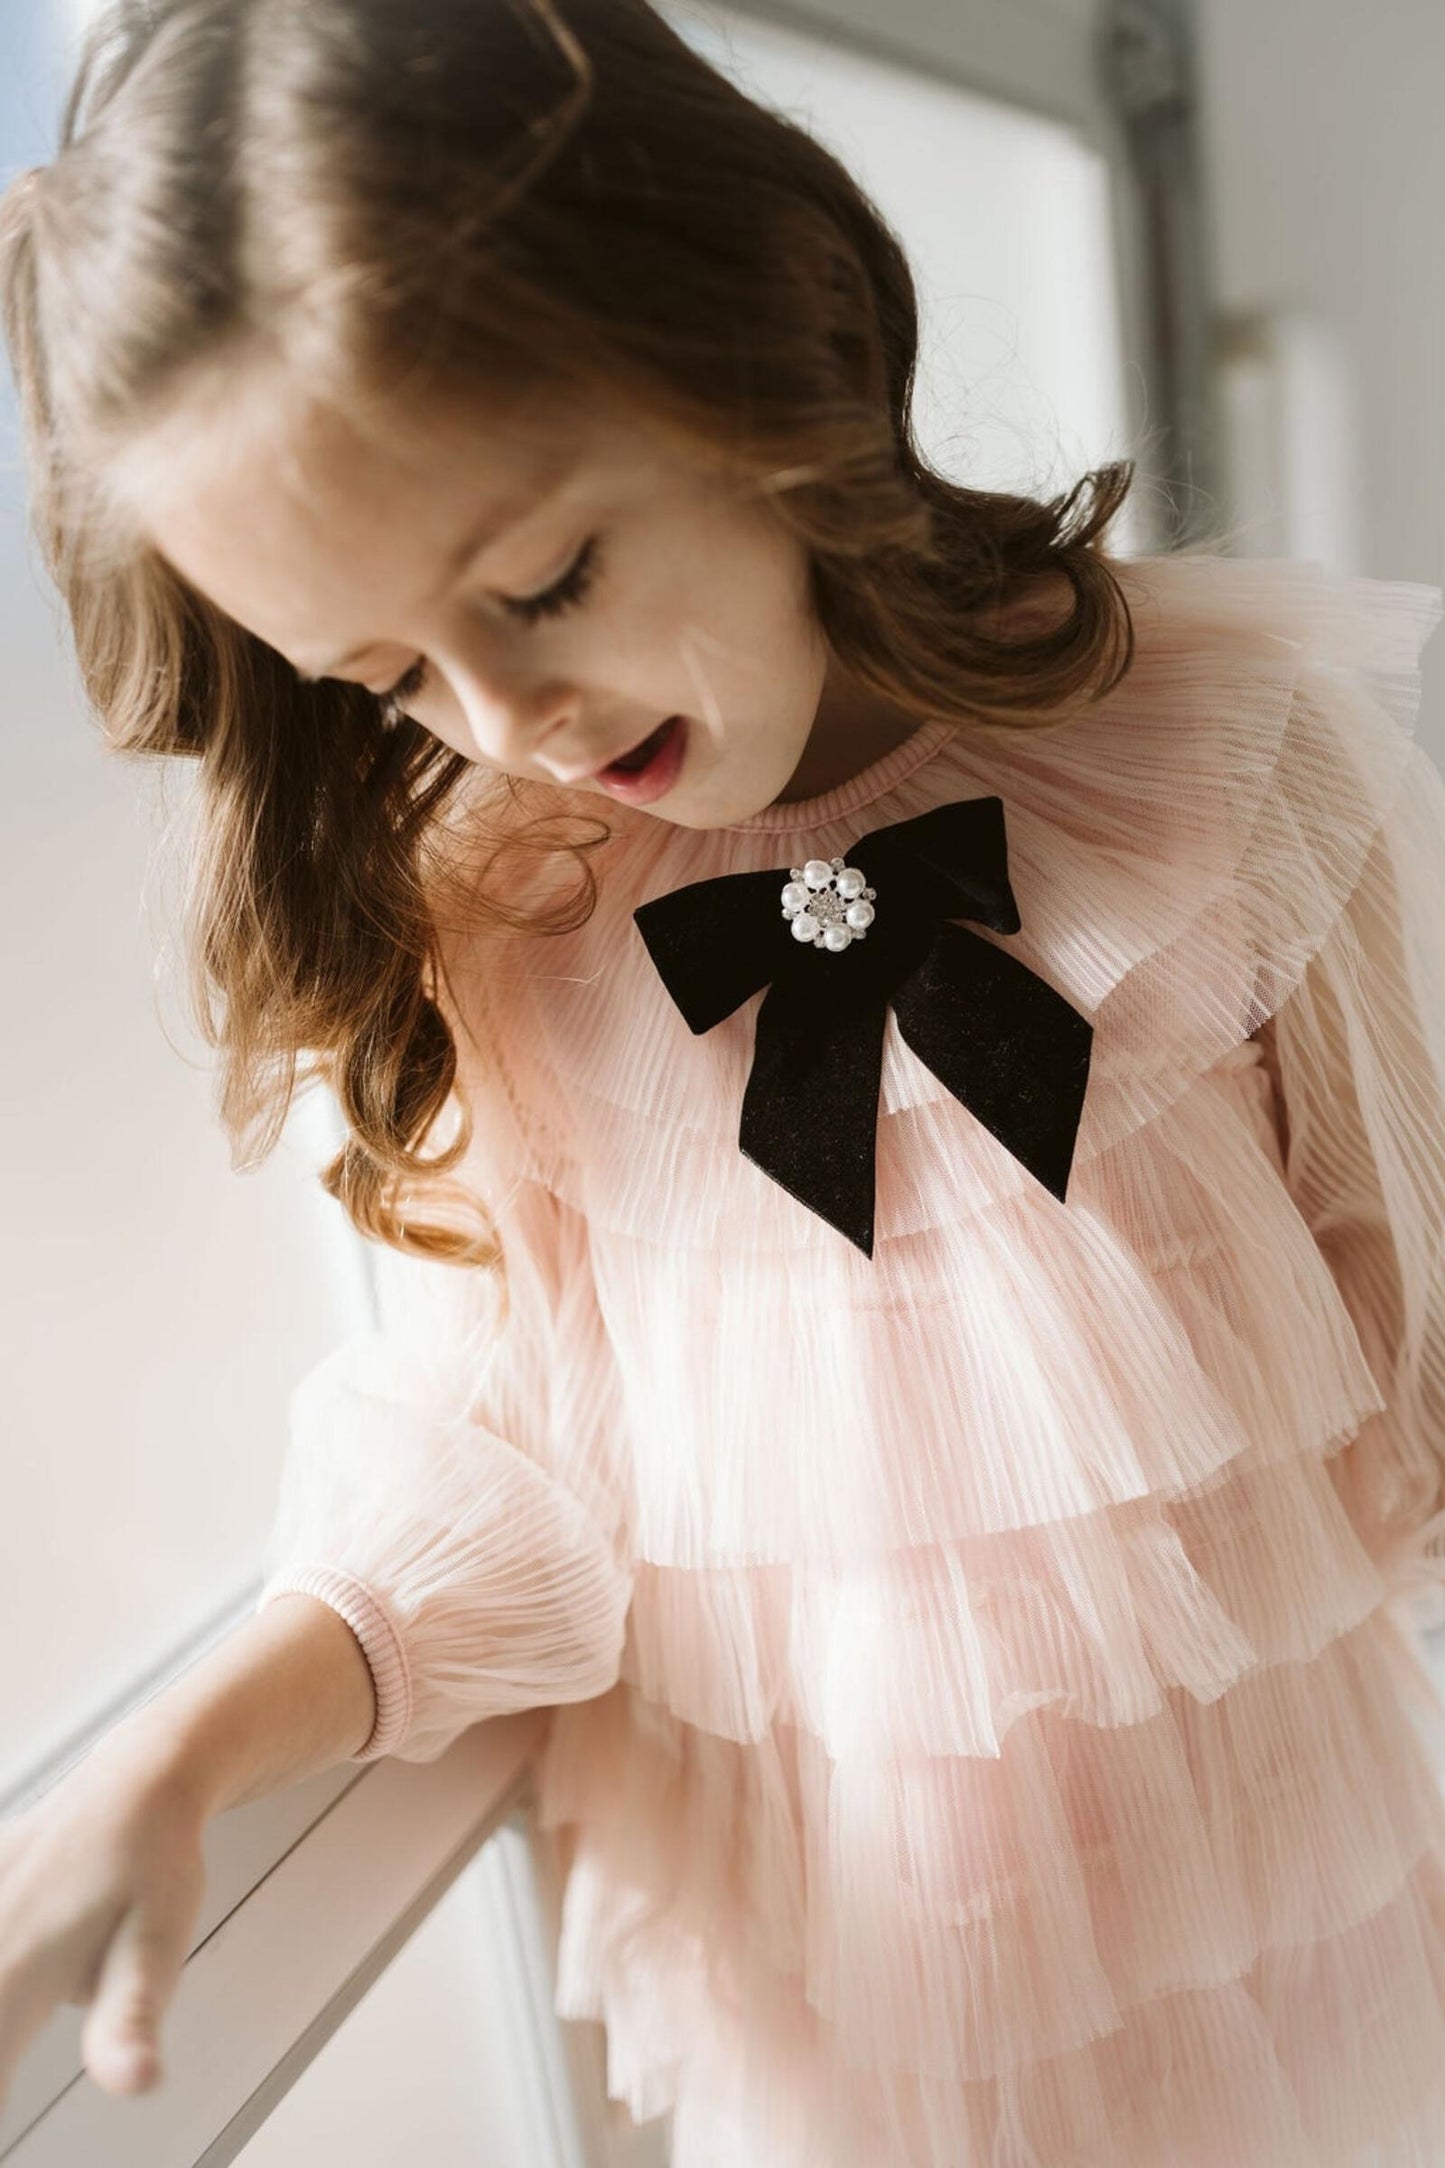 Six Layered Tulle Dress with Velvet Bow | Pink, sz 2